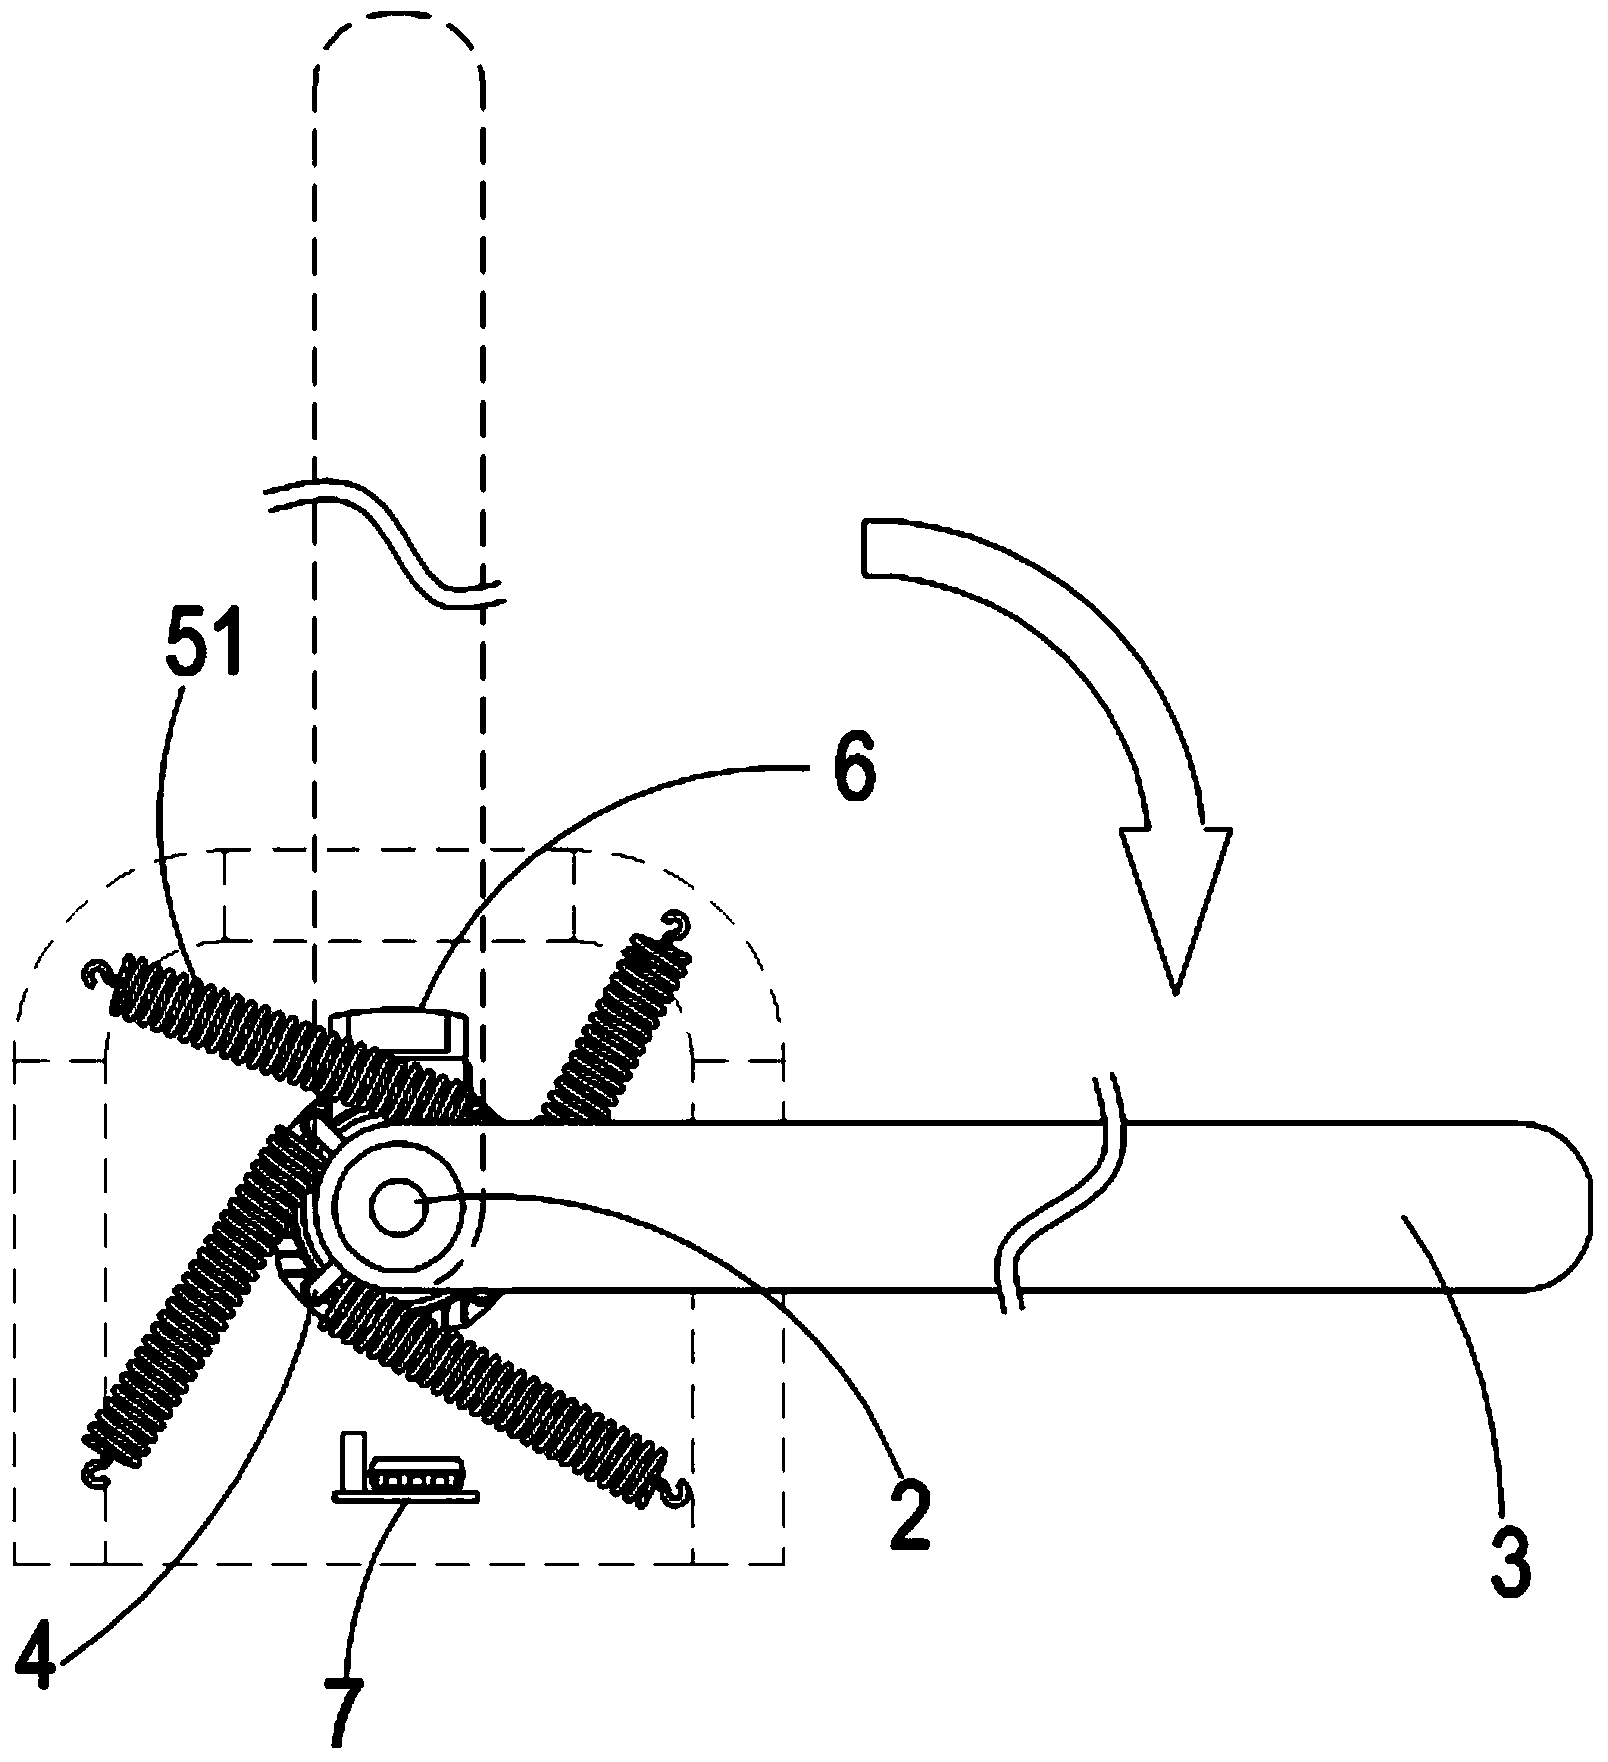 Door and gate device